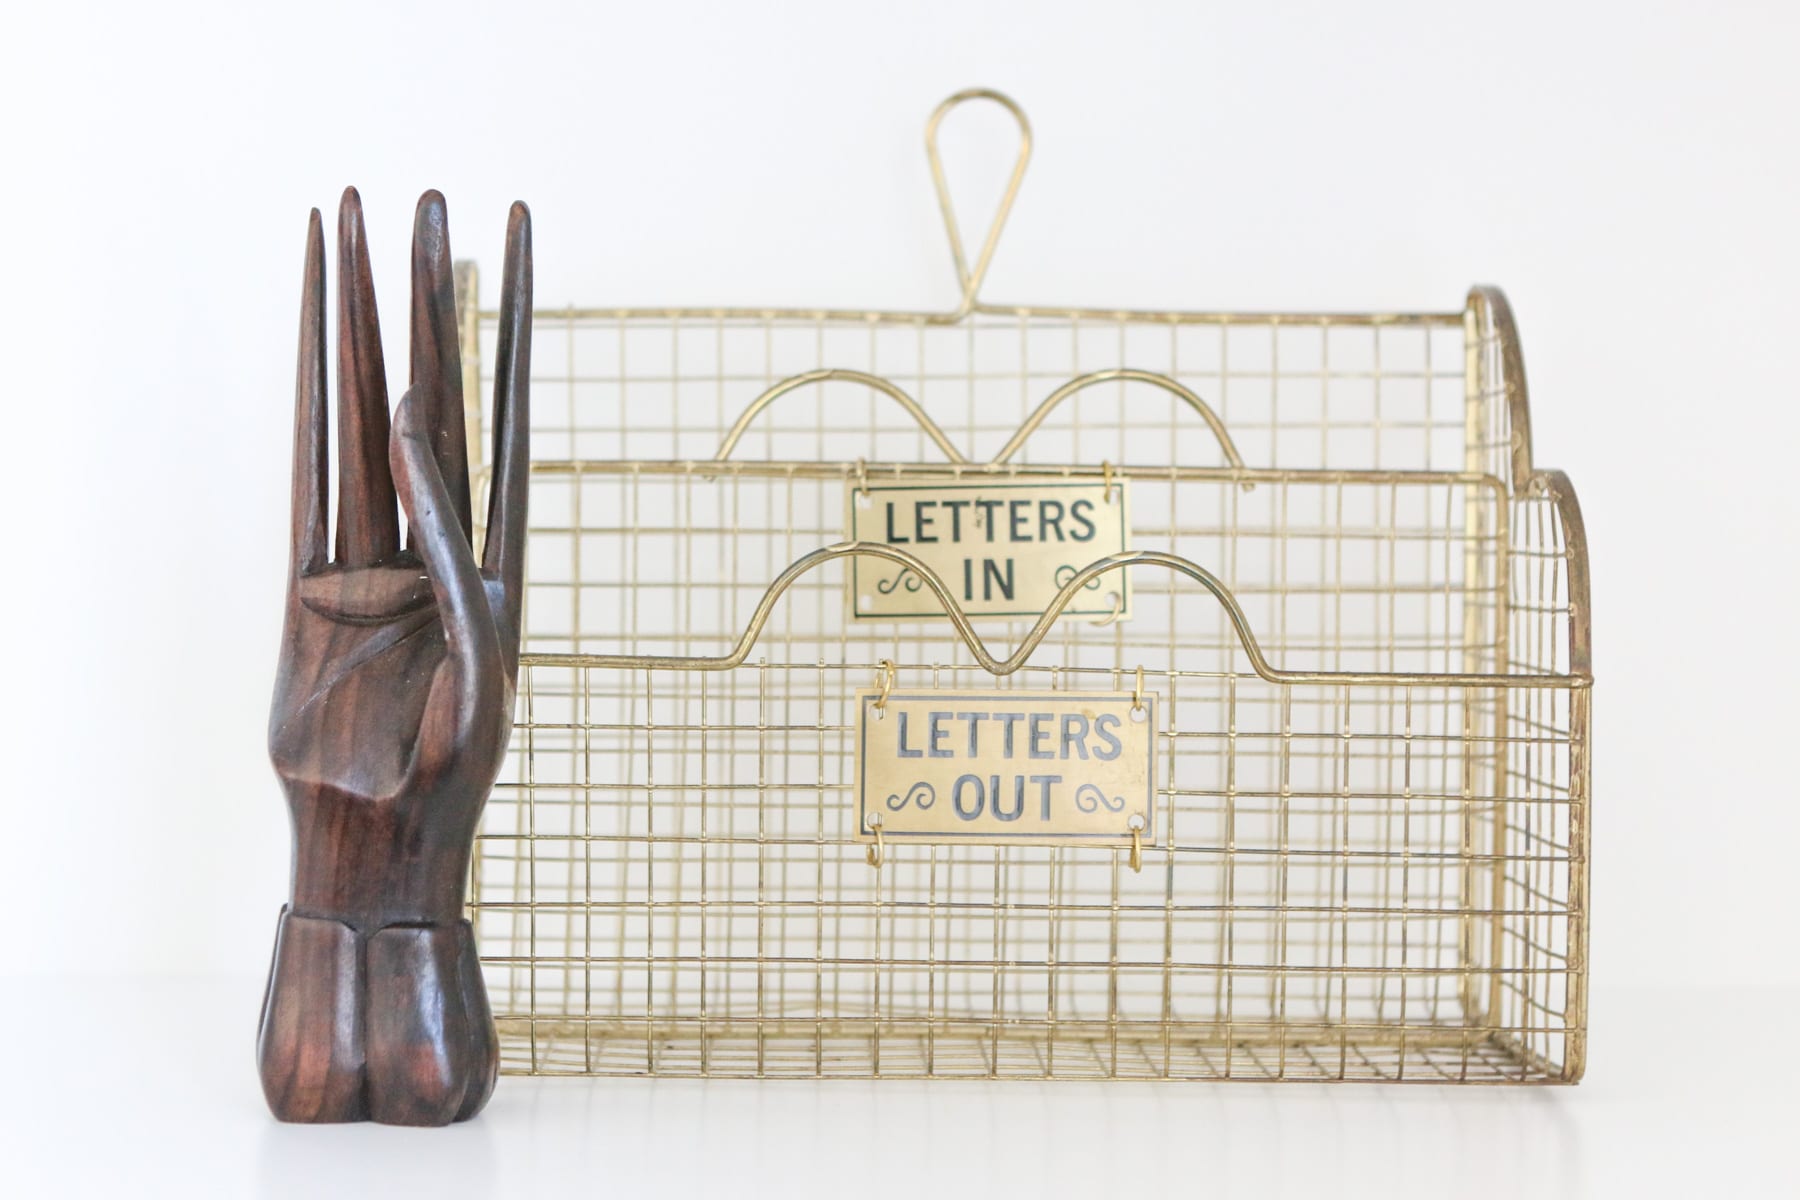 Think outside the box with quirky objects when decorating your built-in shelves